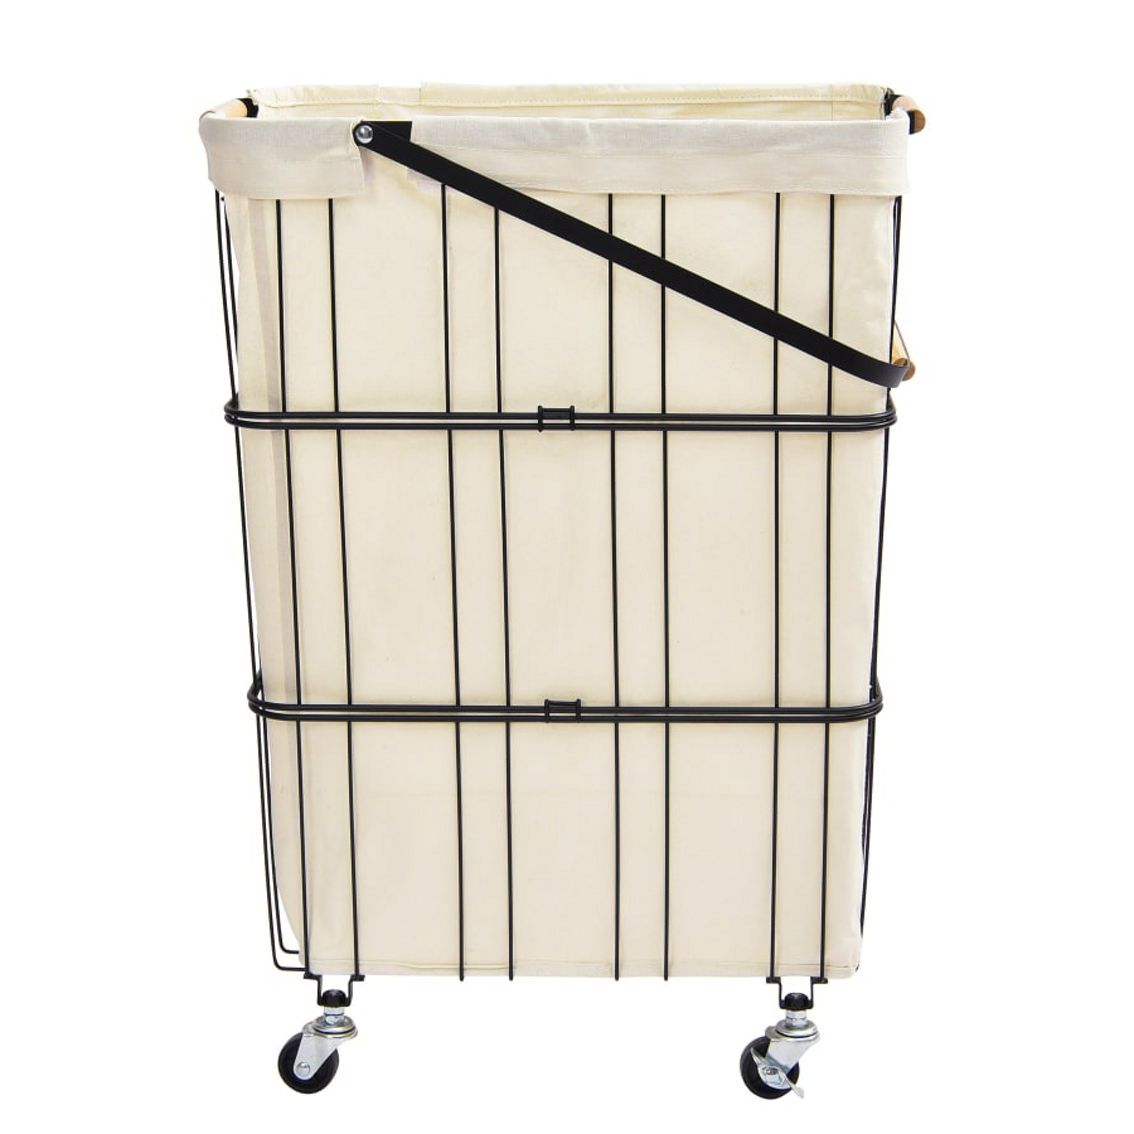 Oceanstar Mobile Rolling Storage Laundry Basket Cart with Handle, Black - Image 2 of 5